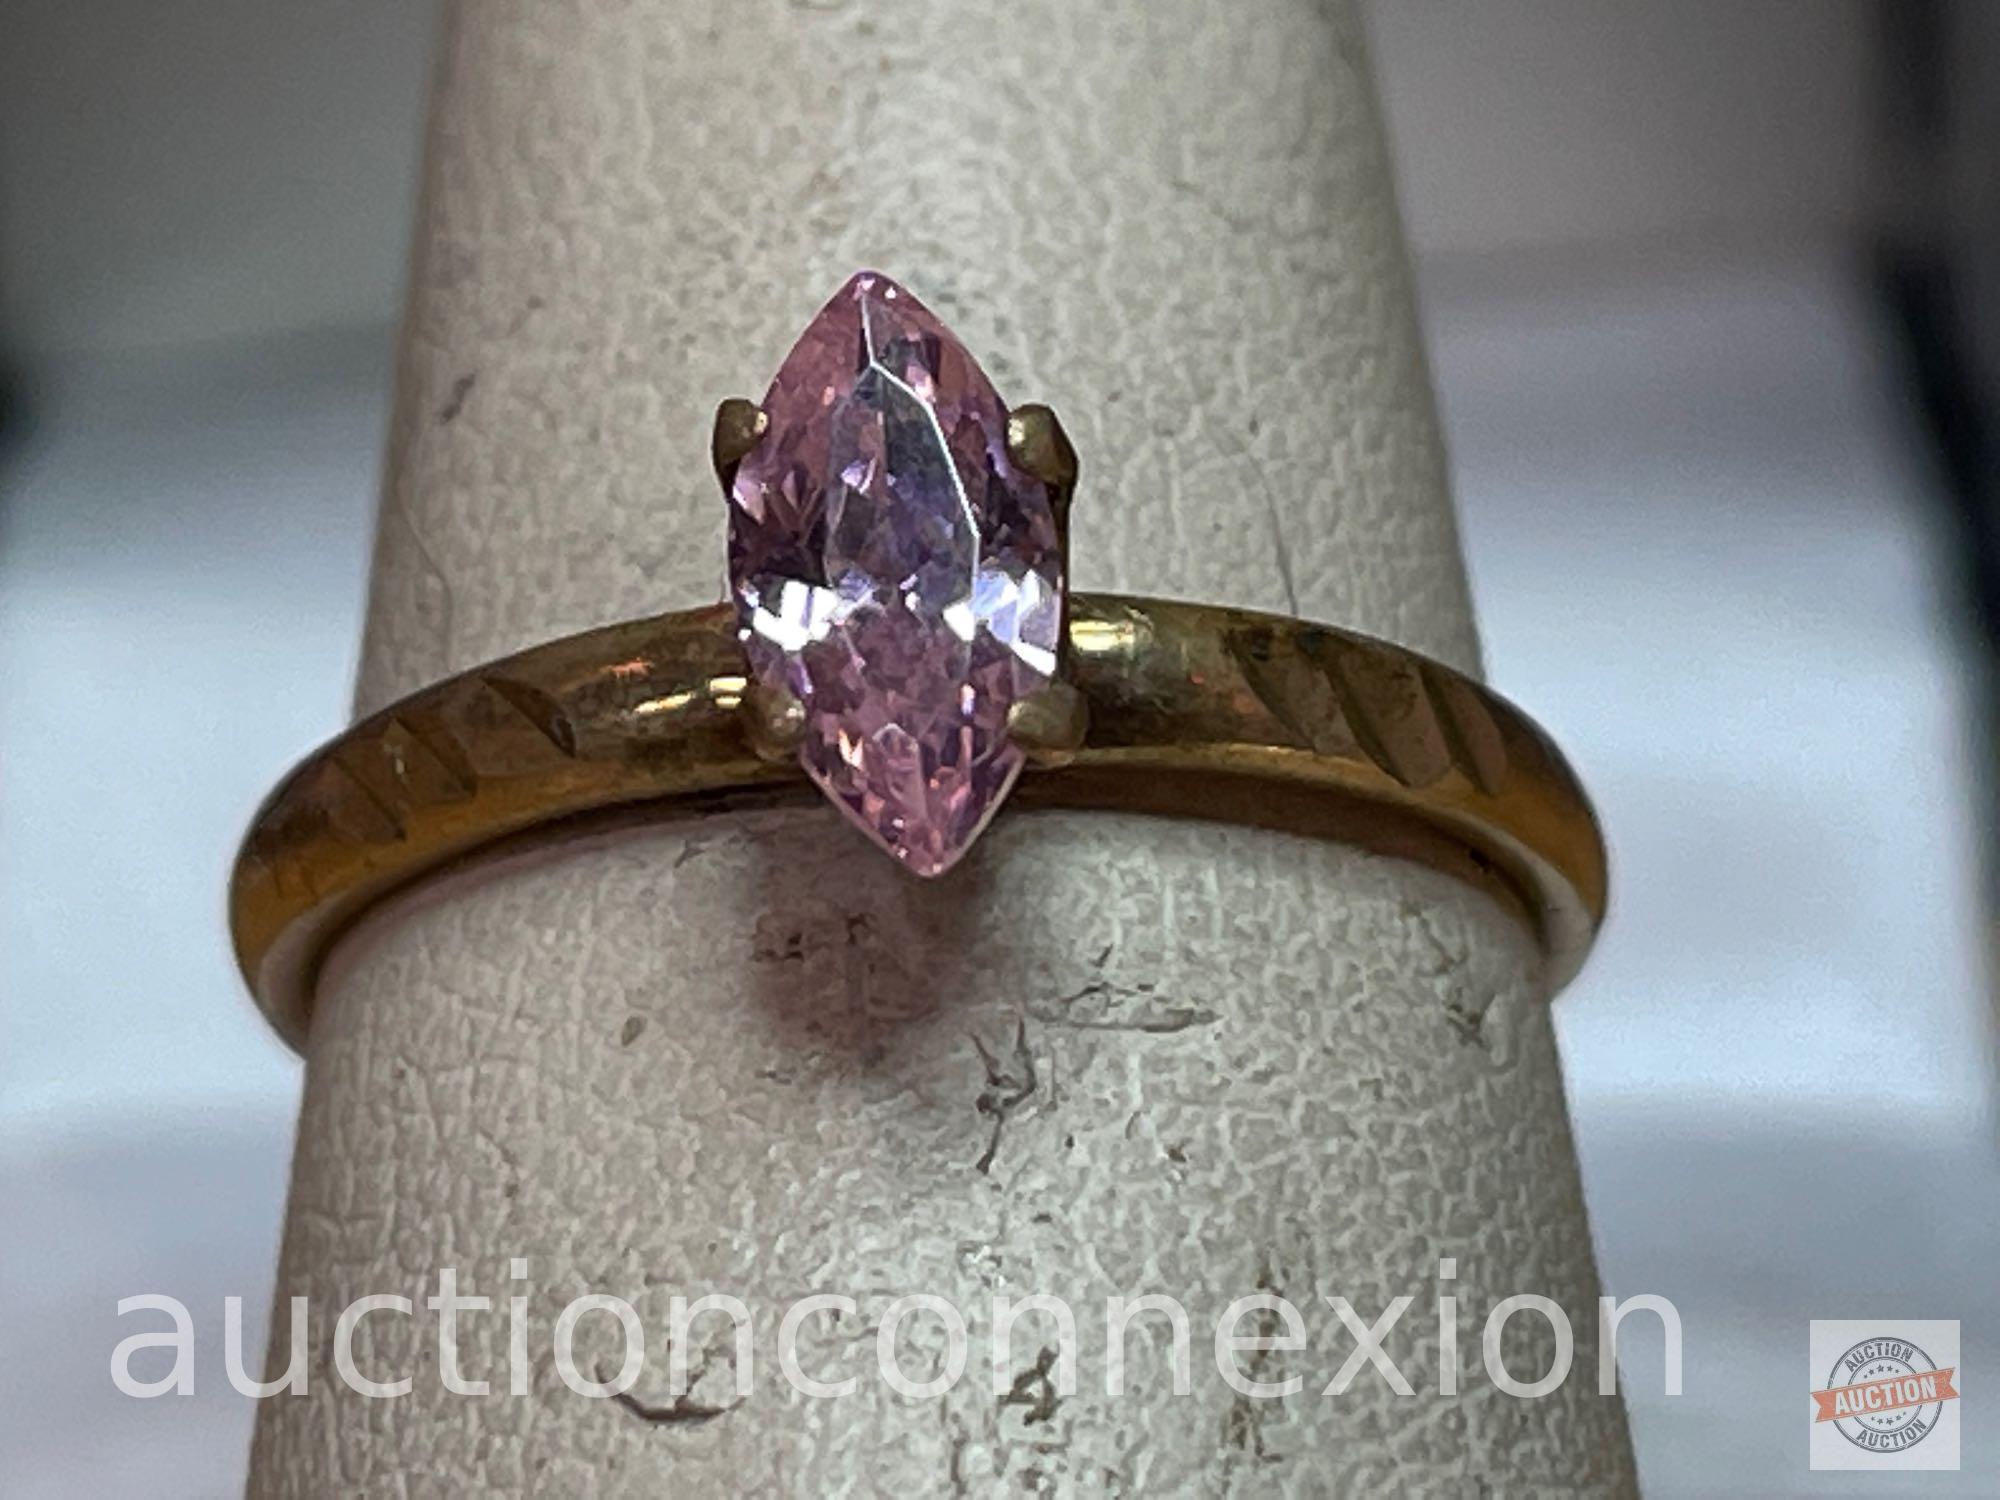 Jewelry - Ring, Marked 14k gold (don't believe it is gold), sz 6.25 with pink stone